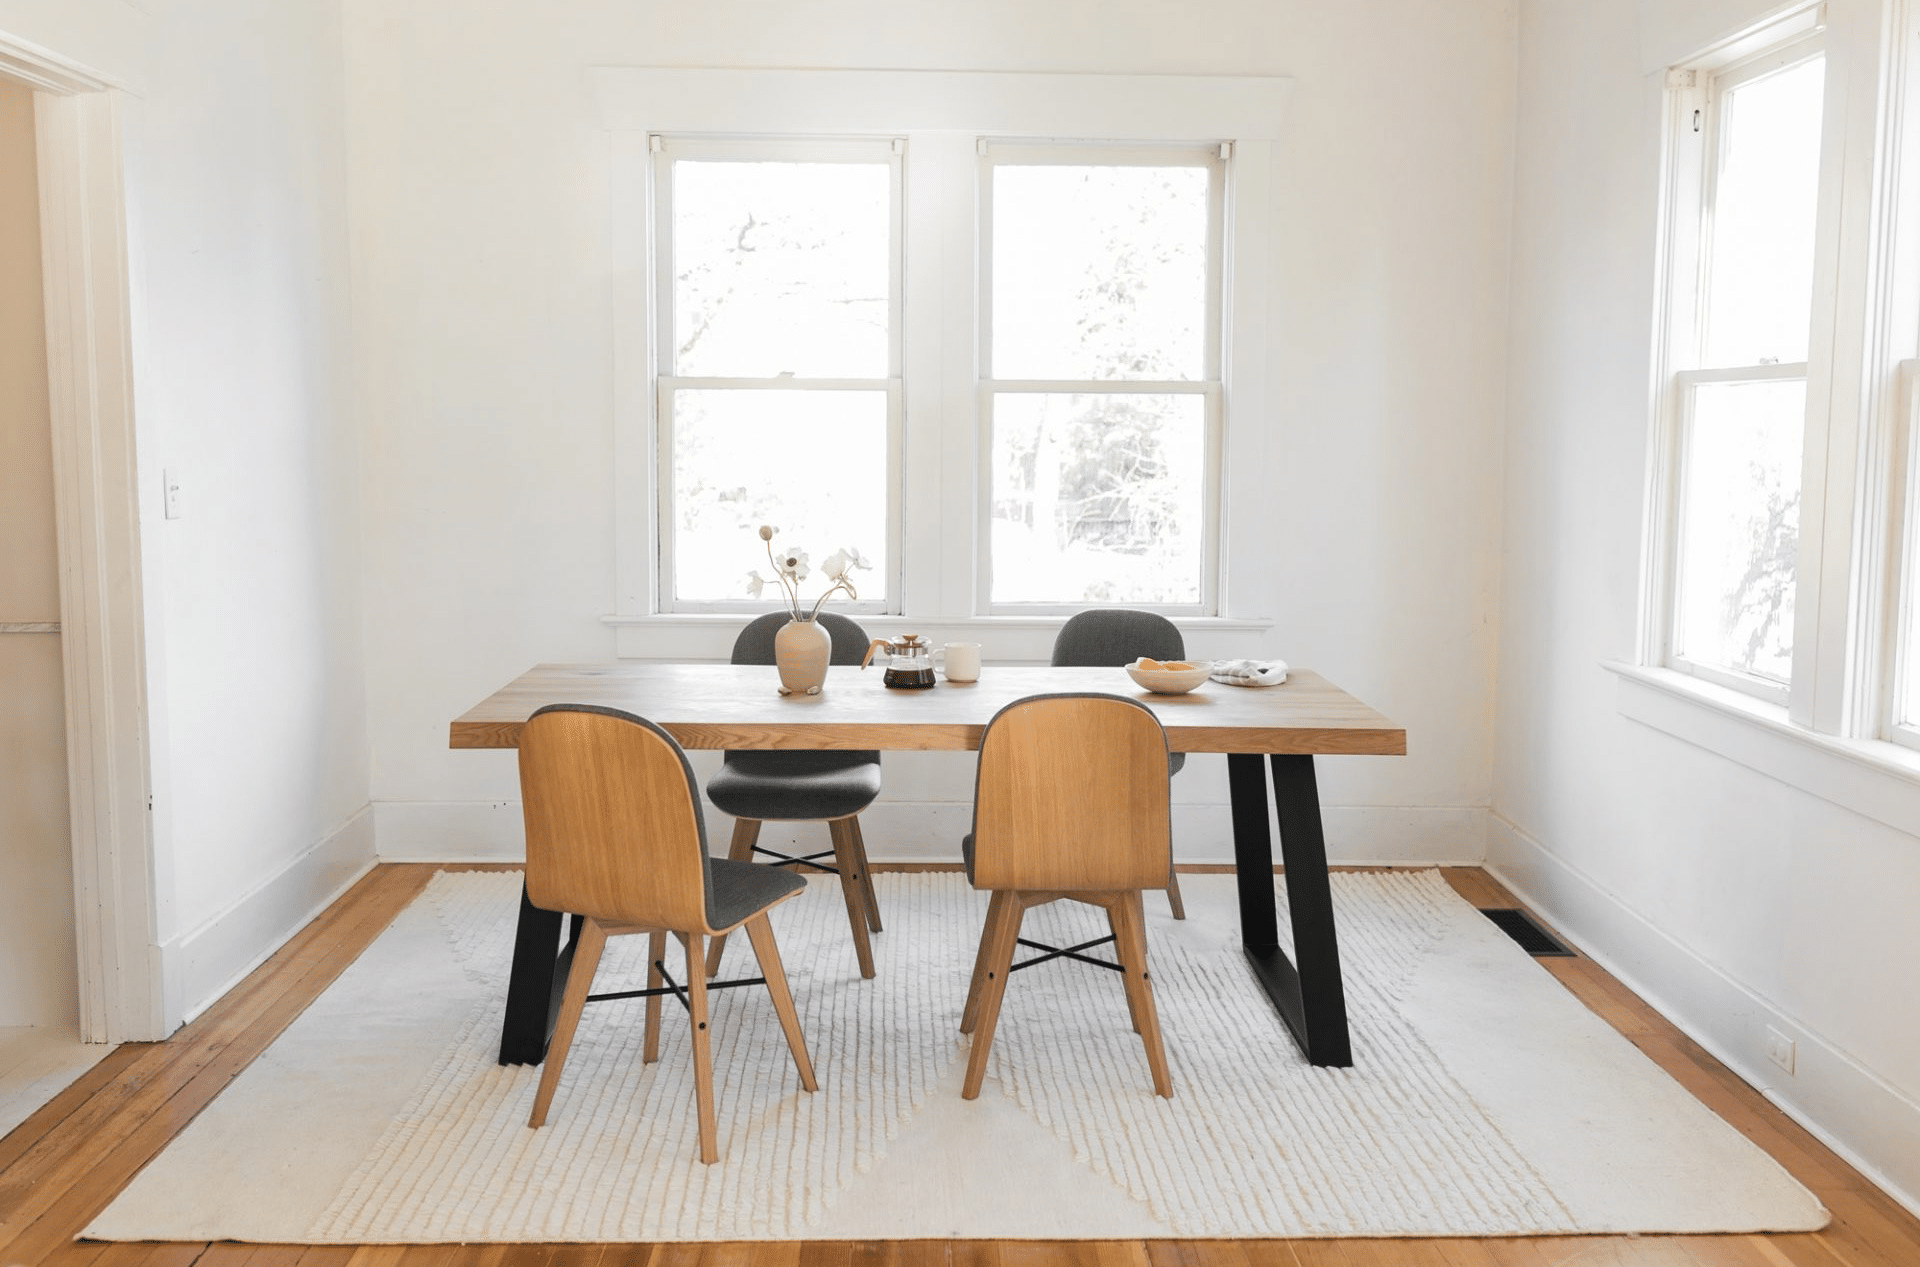 Real Wood Dining Table Style Guide - CO Lumber & Real Wood Furniture